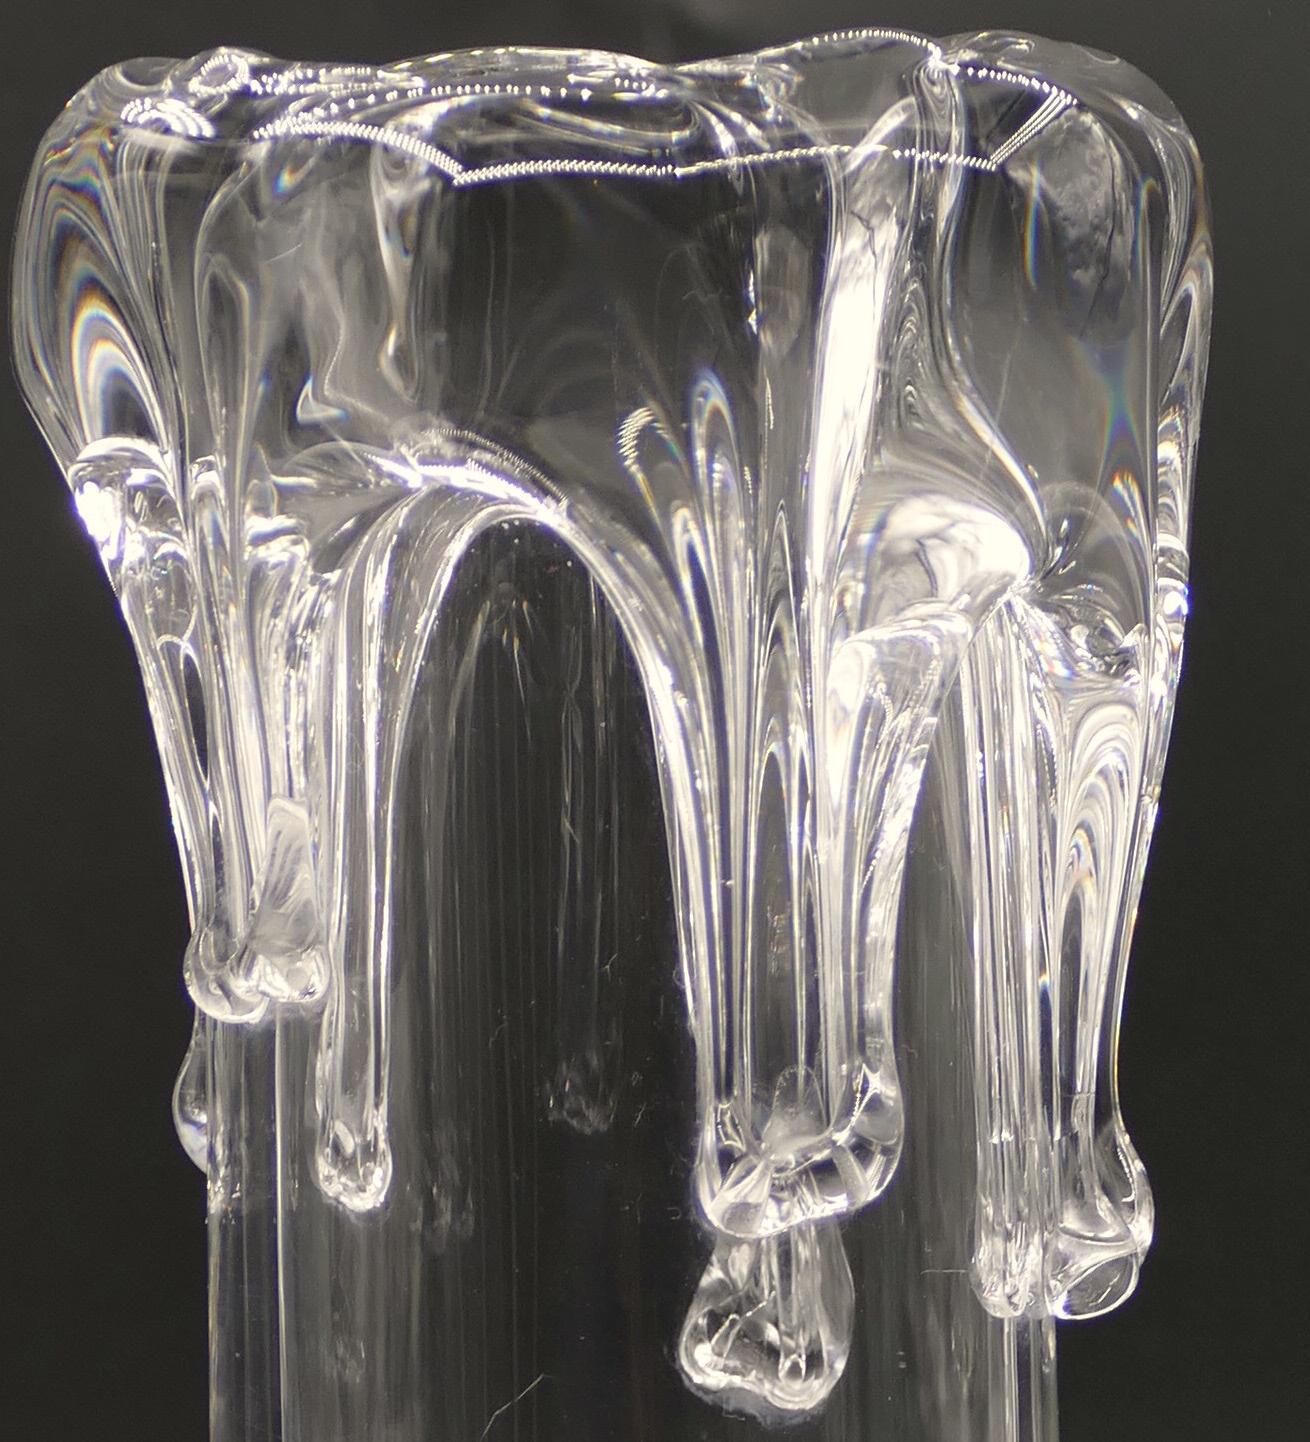 Crystal vase is an original decorative object realized in Germany in the 1960s by Peill & Putzler.

Beautiful little vase realized by the famous glassware Peill & Putzler founded in 1947 as a glasswork & lighting company. The company always worked